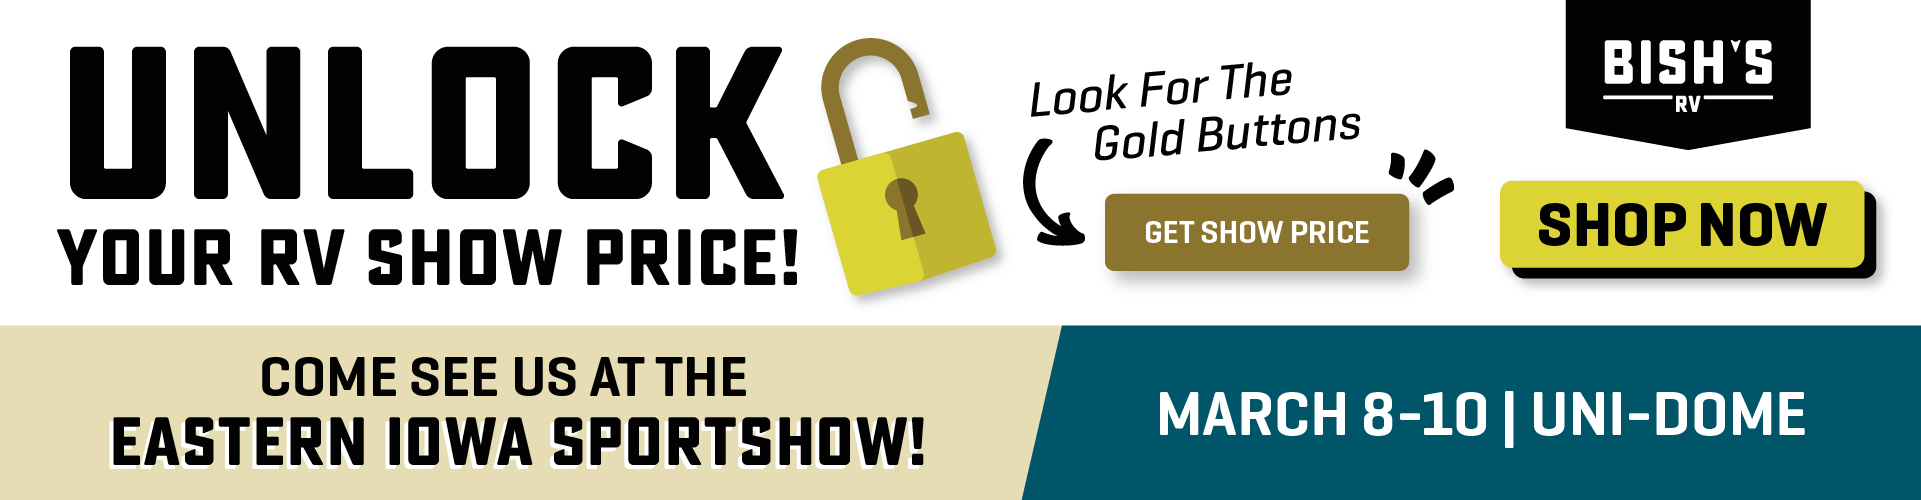 Unlock Your RV Show Price! Come to the Eastern Iowa Sportshow - March 8-10 at the UNI-Dome!